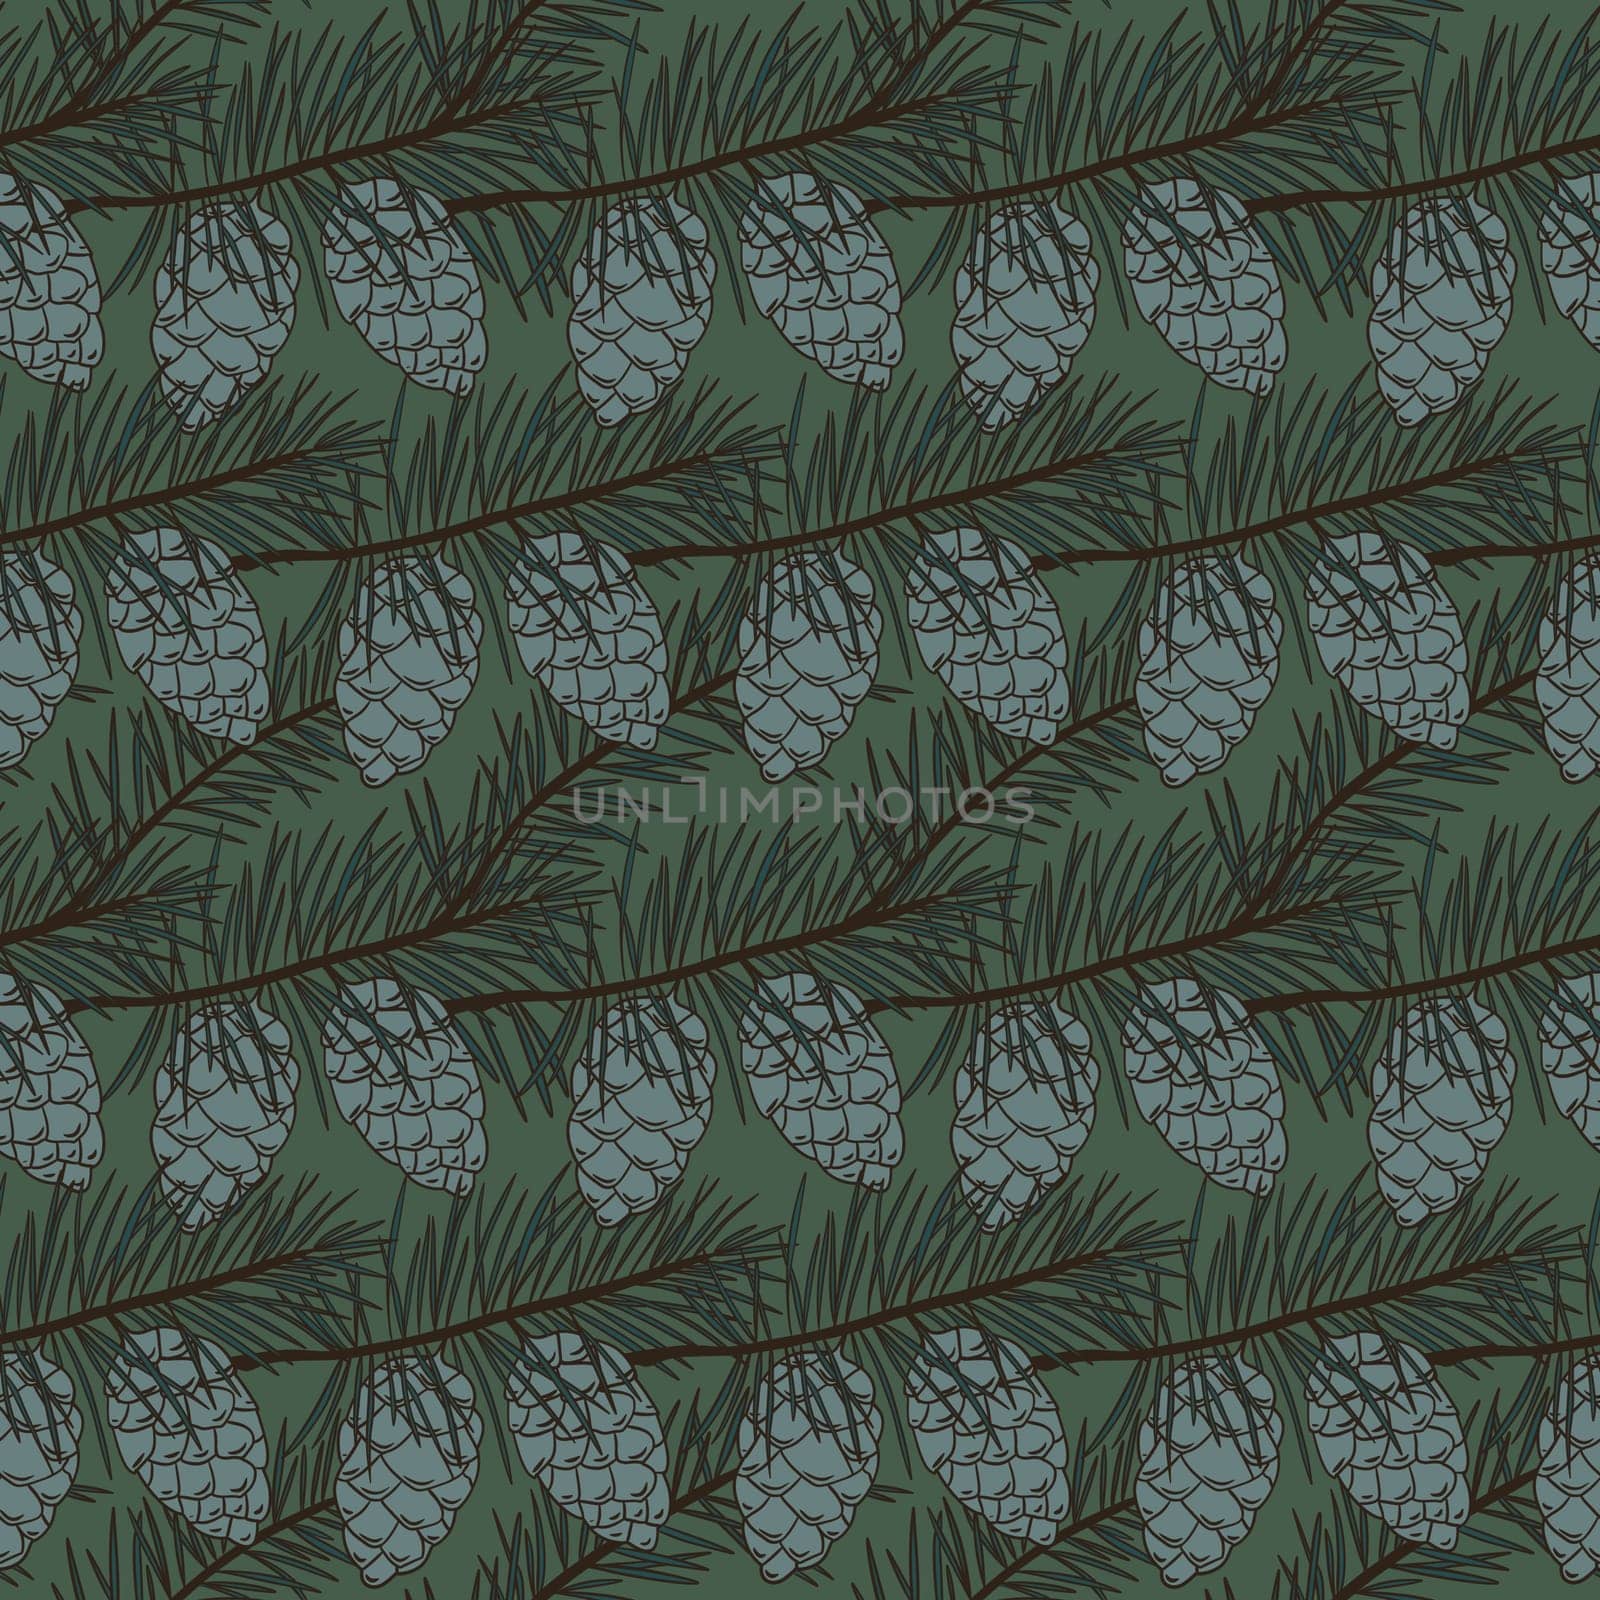 Hand drawn seamless pattern with pine conifer spruce branches twigs and cones on dark sage green background, Christmas winter new year print for textile wrapping paper, natural colors forest wood evergreen